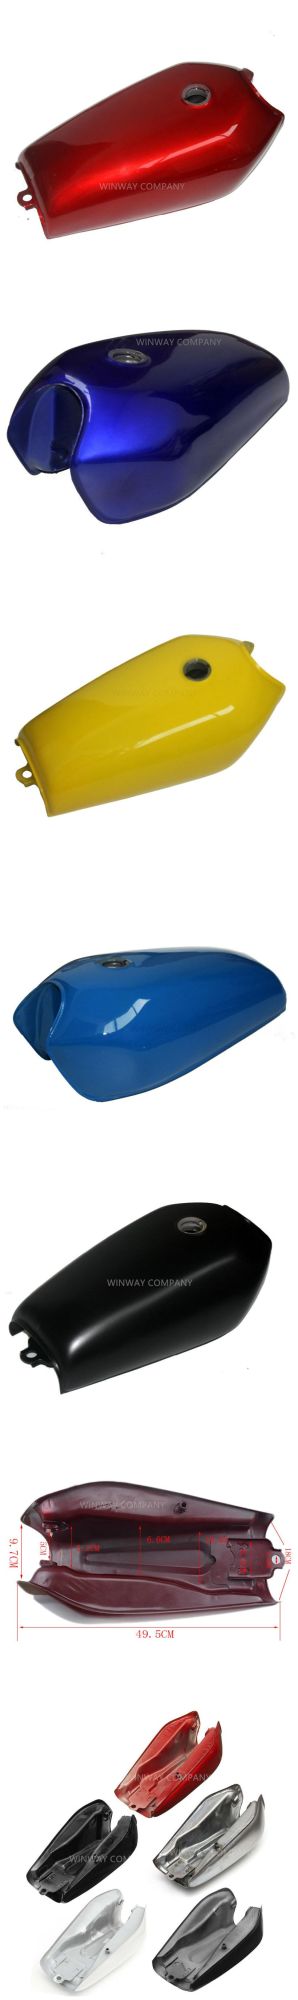 9L Colorful Motorcycle Fuel Oil Gas Tank for Honda Cg125